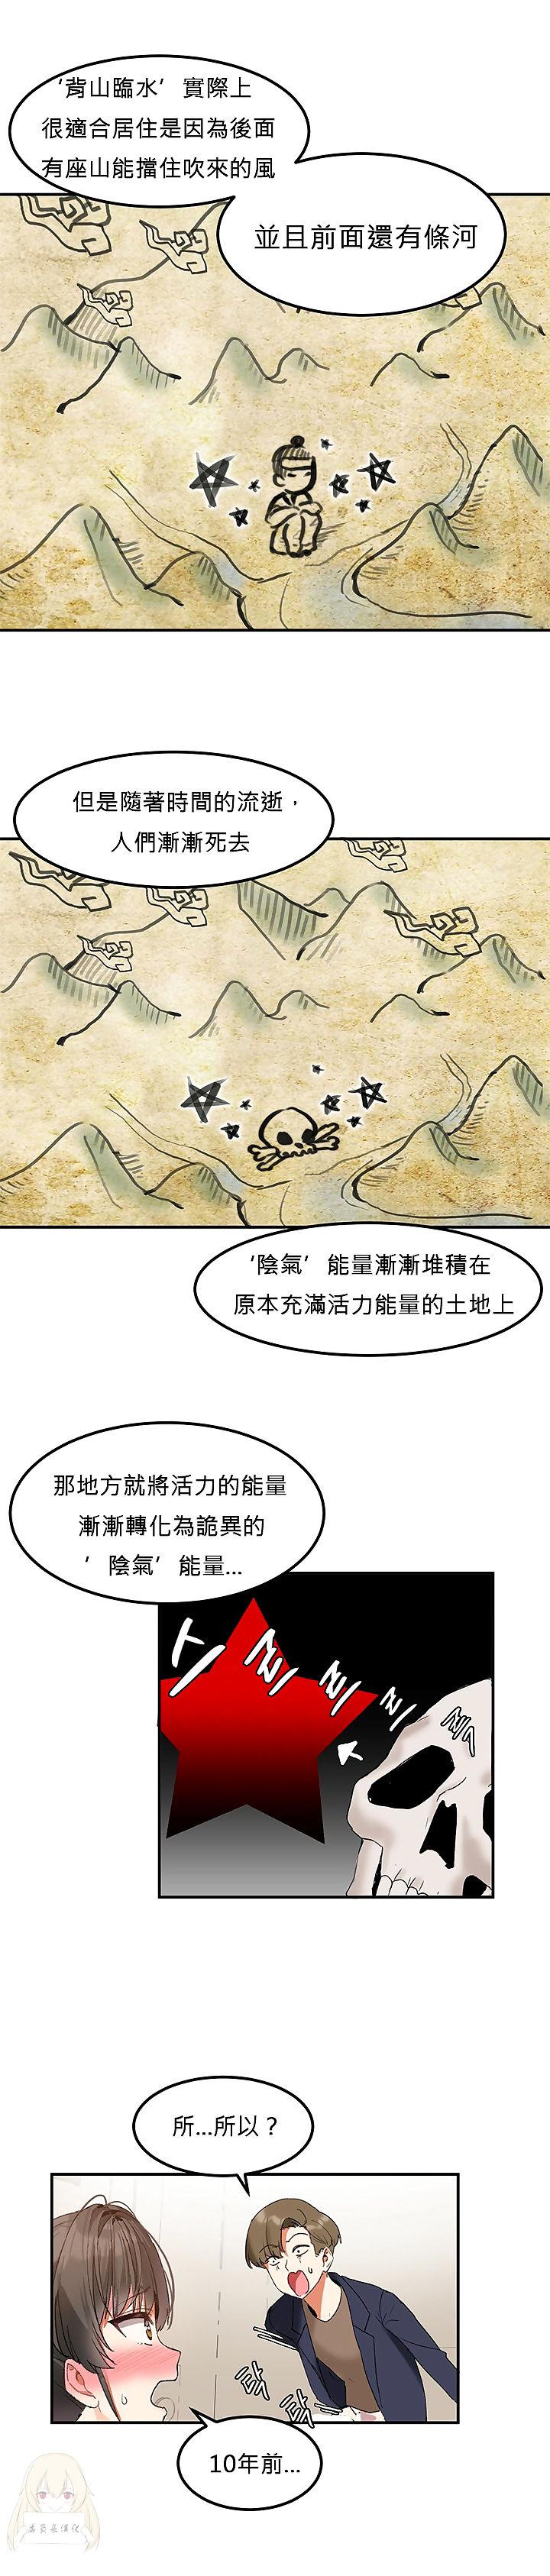 Hahris Lumpy Star Ch.1~4 【委員長個人漢化】持續更新） - part 2 page 1